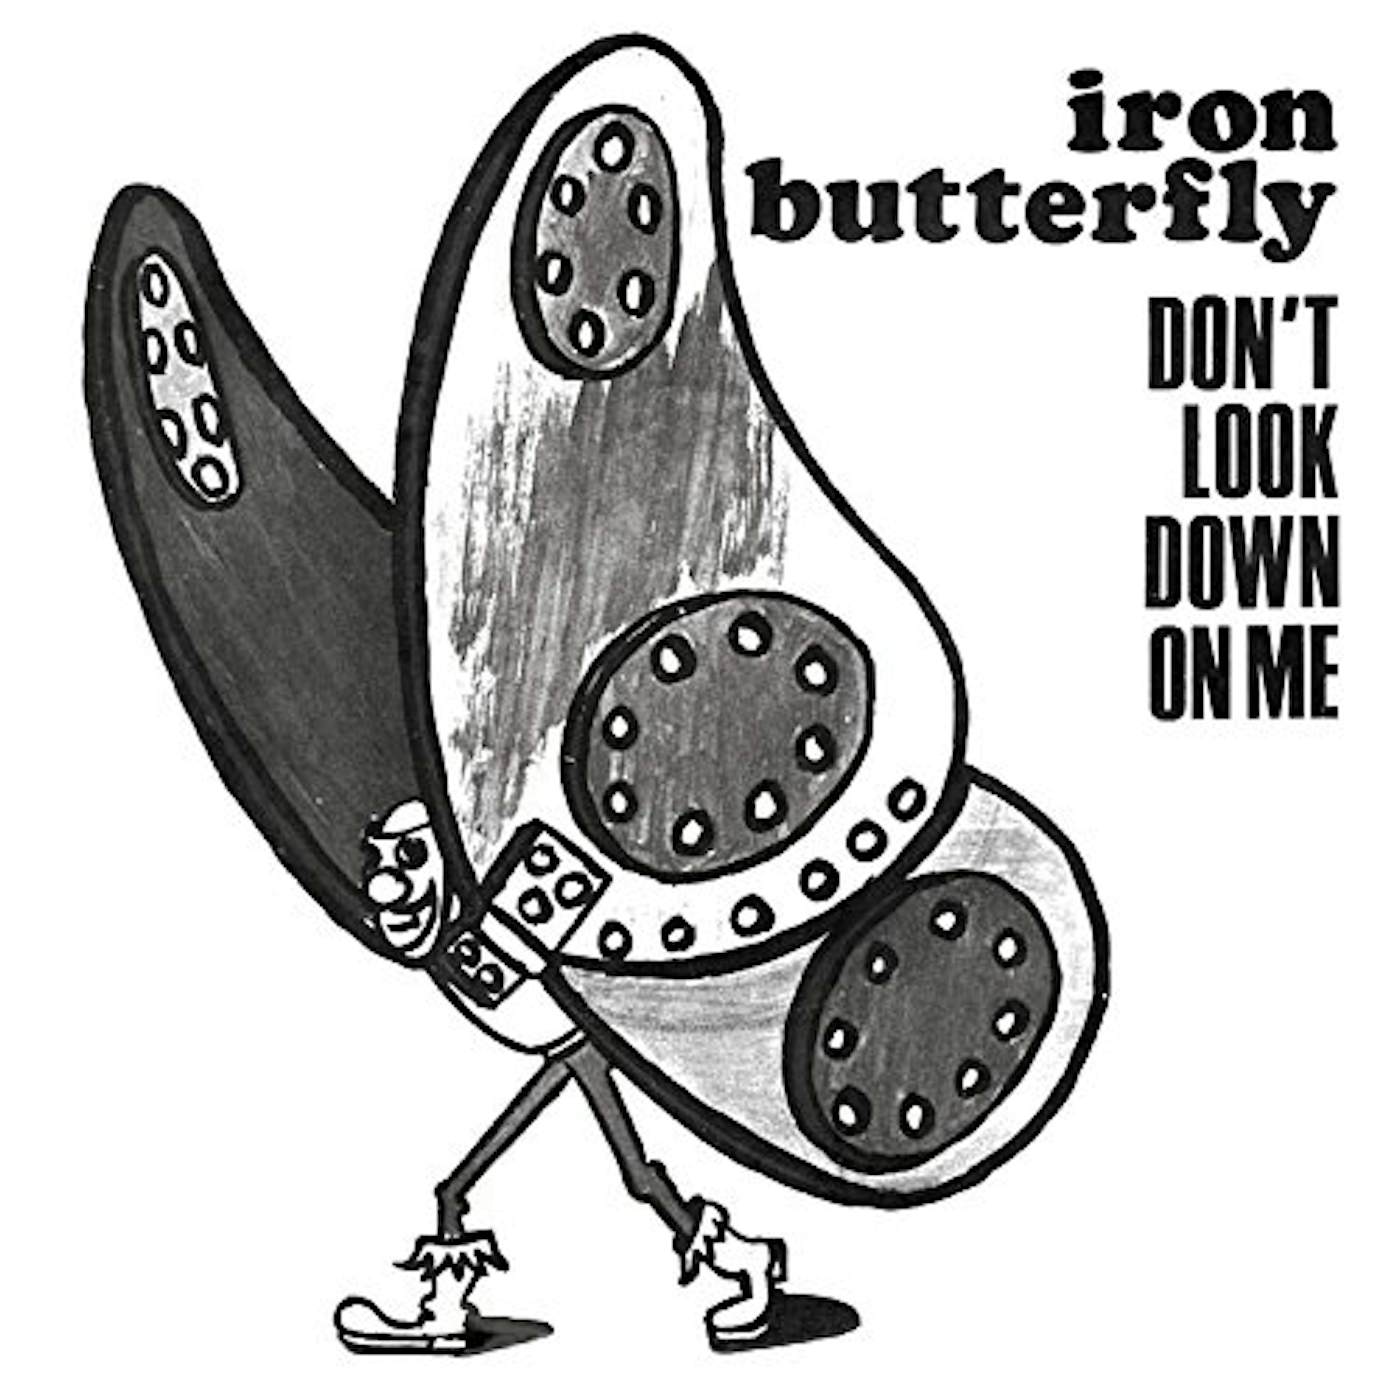 Iron Butterfly DONT LOOK DOWN ON ME Vinyl Record